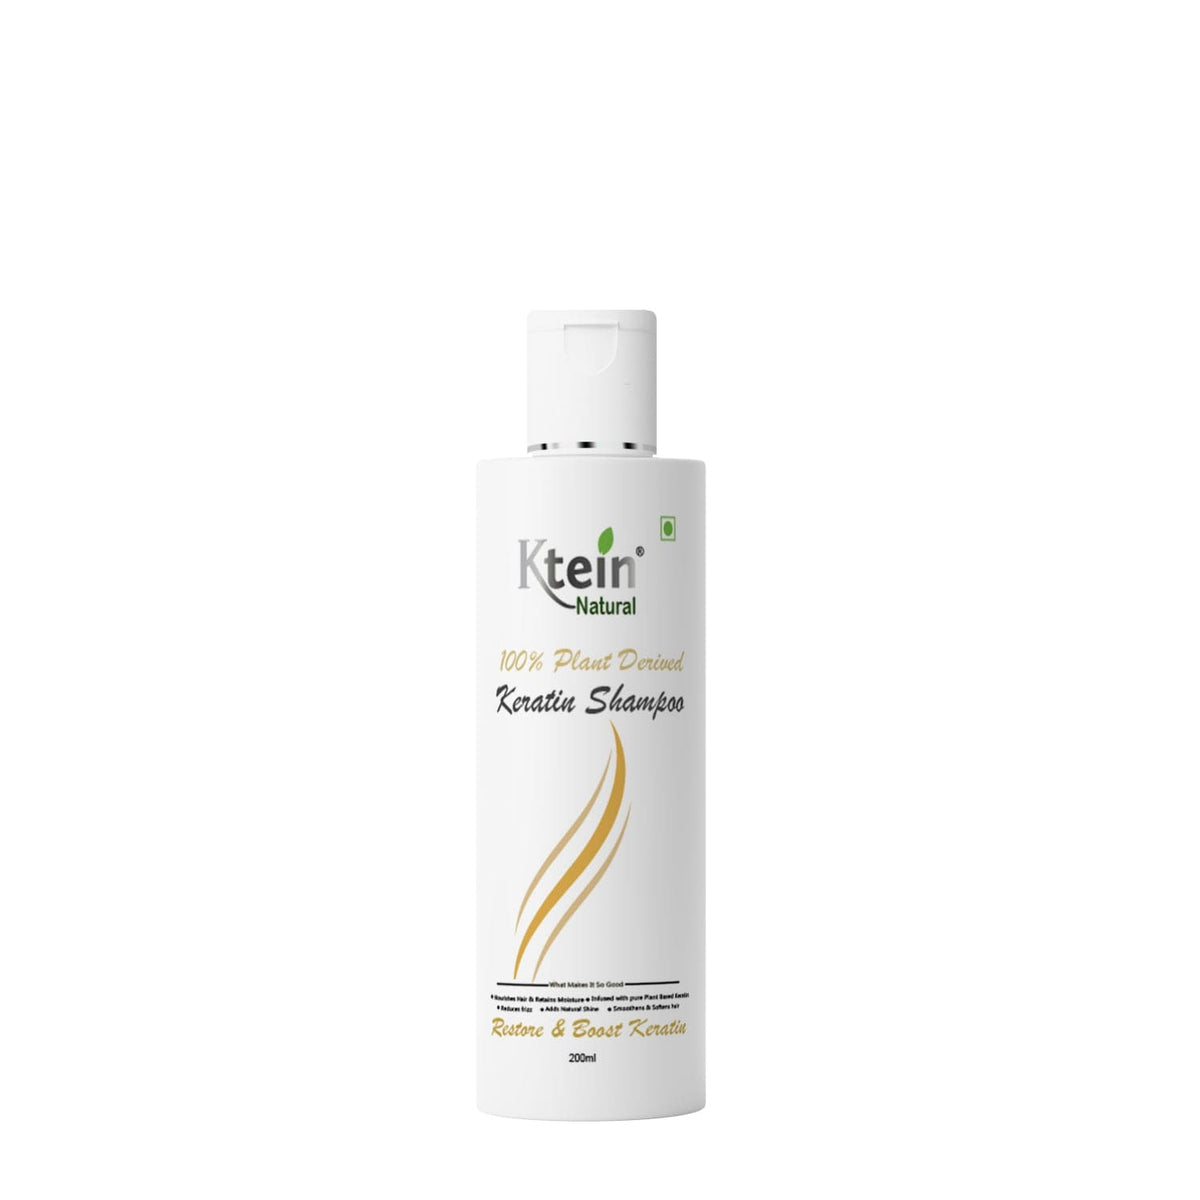 100% Plant Derived Keratin Shampoo & Conditioner Combo - 200ml - Ktein Cosmetics By Ktein Biotech Private Limited